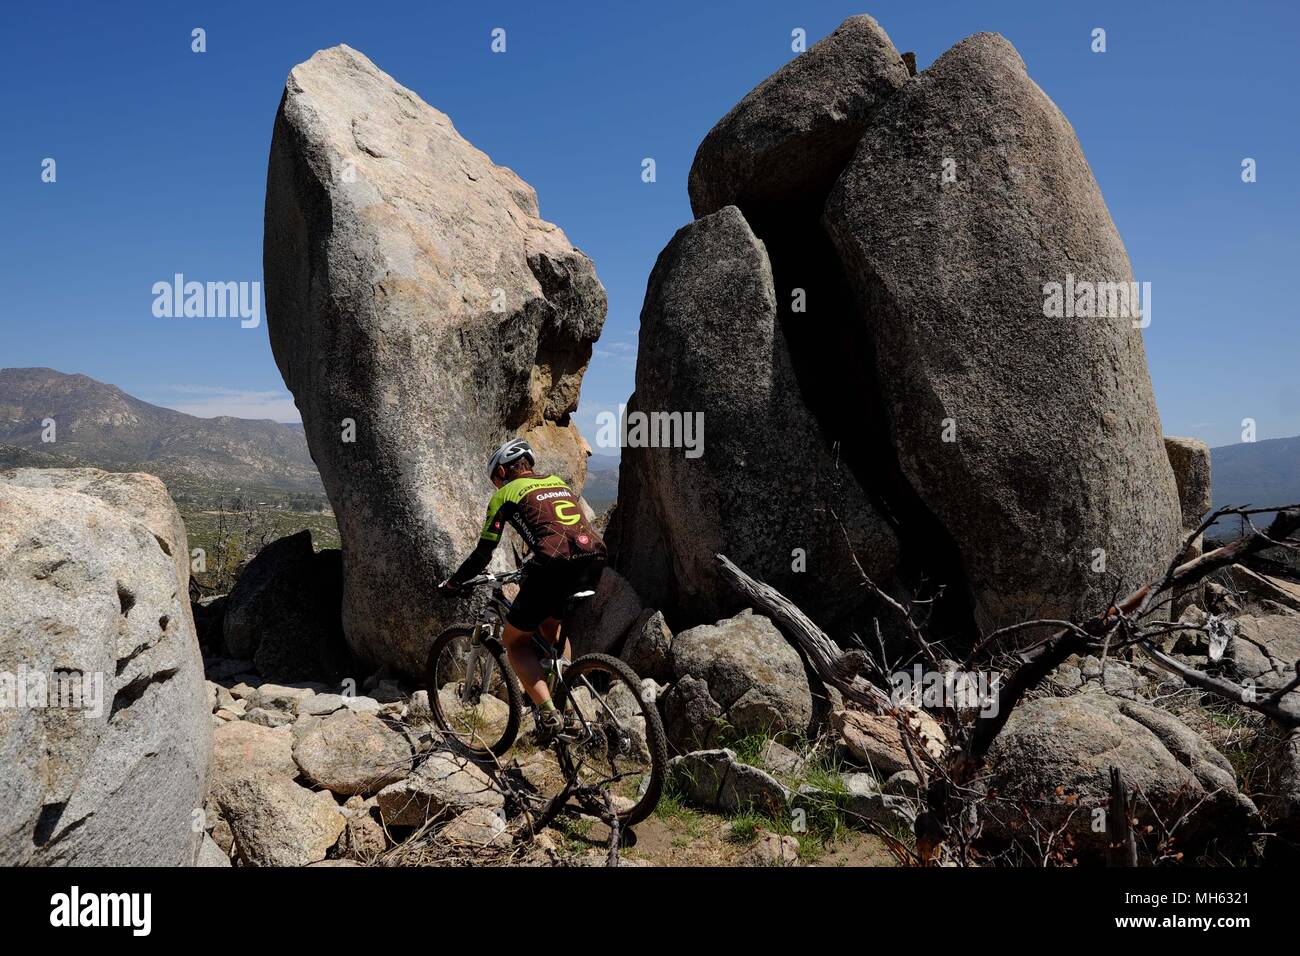 Idyllwild, California, USA. 29th Apr, 2018. Mountain biker rides steep trails past wildflowers, huge granite rock slabs and pine tress at elevations above 6,500ft high above the desert floor near Idyllwild in the San Jacinto Mountains. Rising abruptly from the desert floor, the Santa Rosa and San Jacinto Mountains National Monument reaches an elevation of 10,834 feet, the northernmost of the Peninsular Ranges system. Many flora and fauna species within the national monument are state and federal listed threatened or endangered species, including the Peninsular Bighorn Sheep (Ovis canadensis c Stock Photo